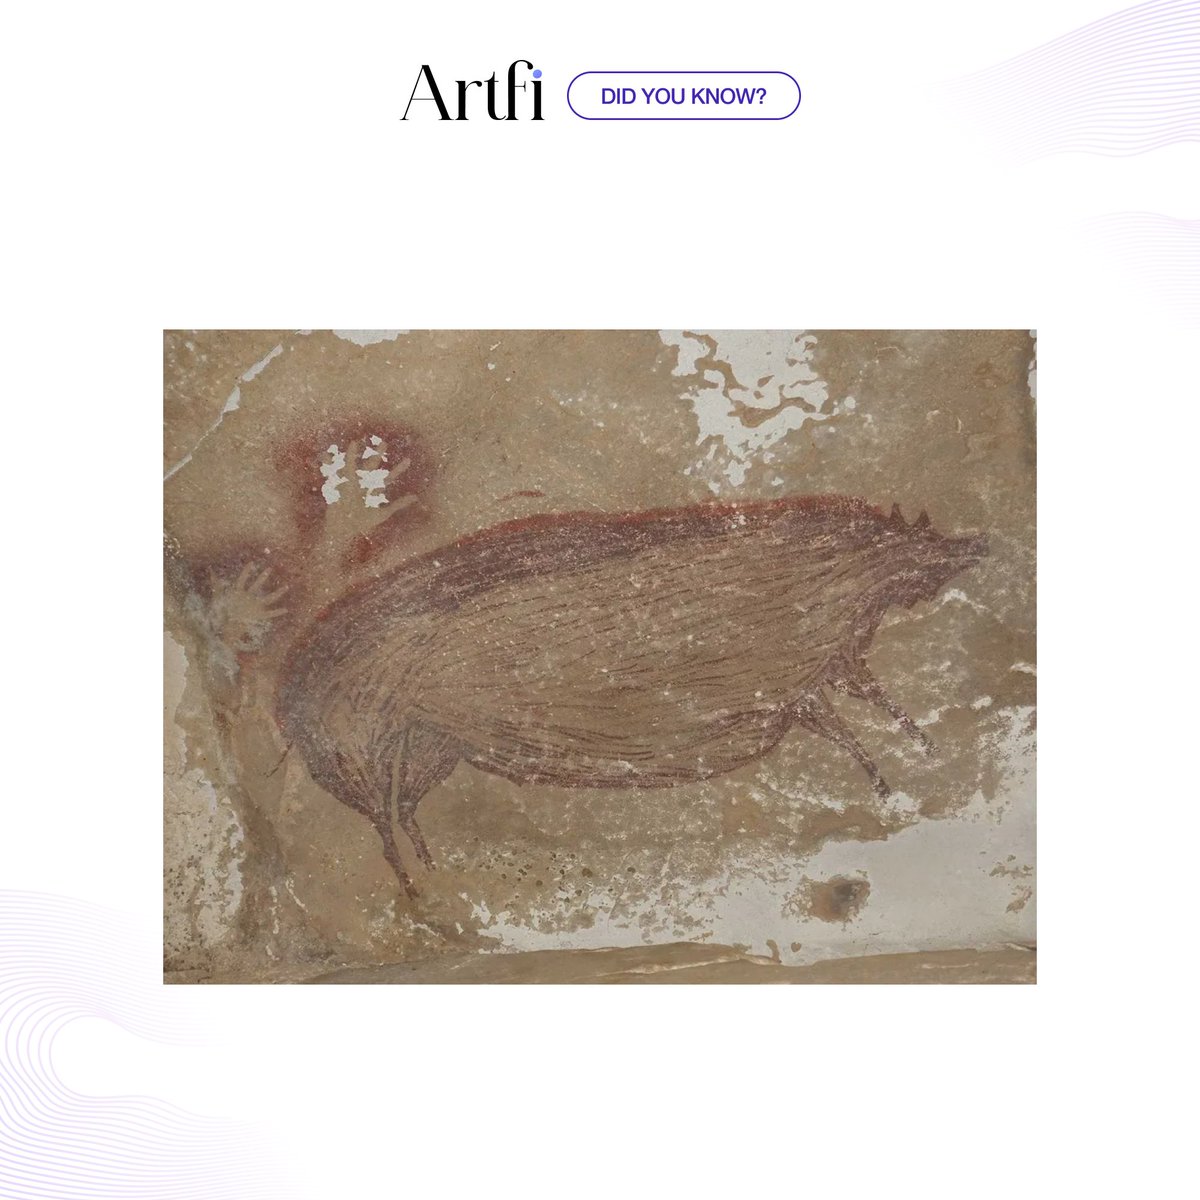 Did you know the world's oldest known figurative art, a painting of a pig on a cave wall in Indonesia, dates back over 45,500 years? #arthistory #artfi

Explore more about this: smithsonianmag.com/science-nature…